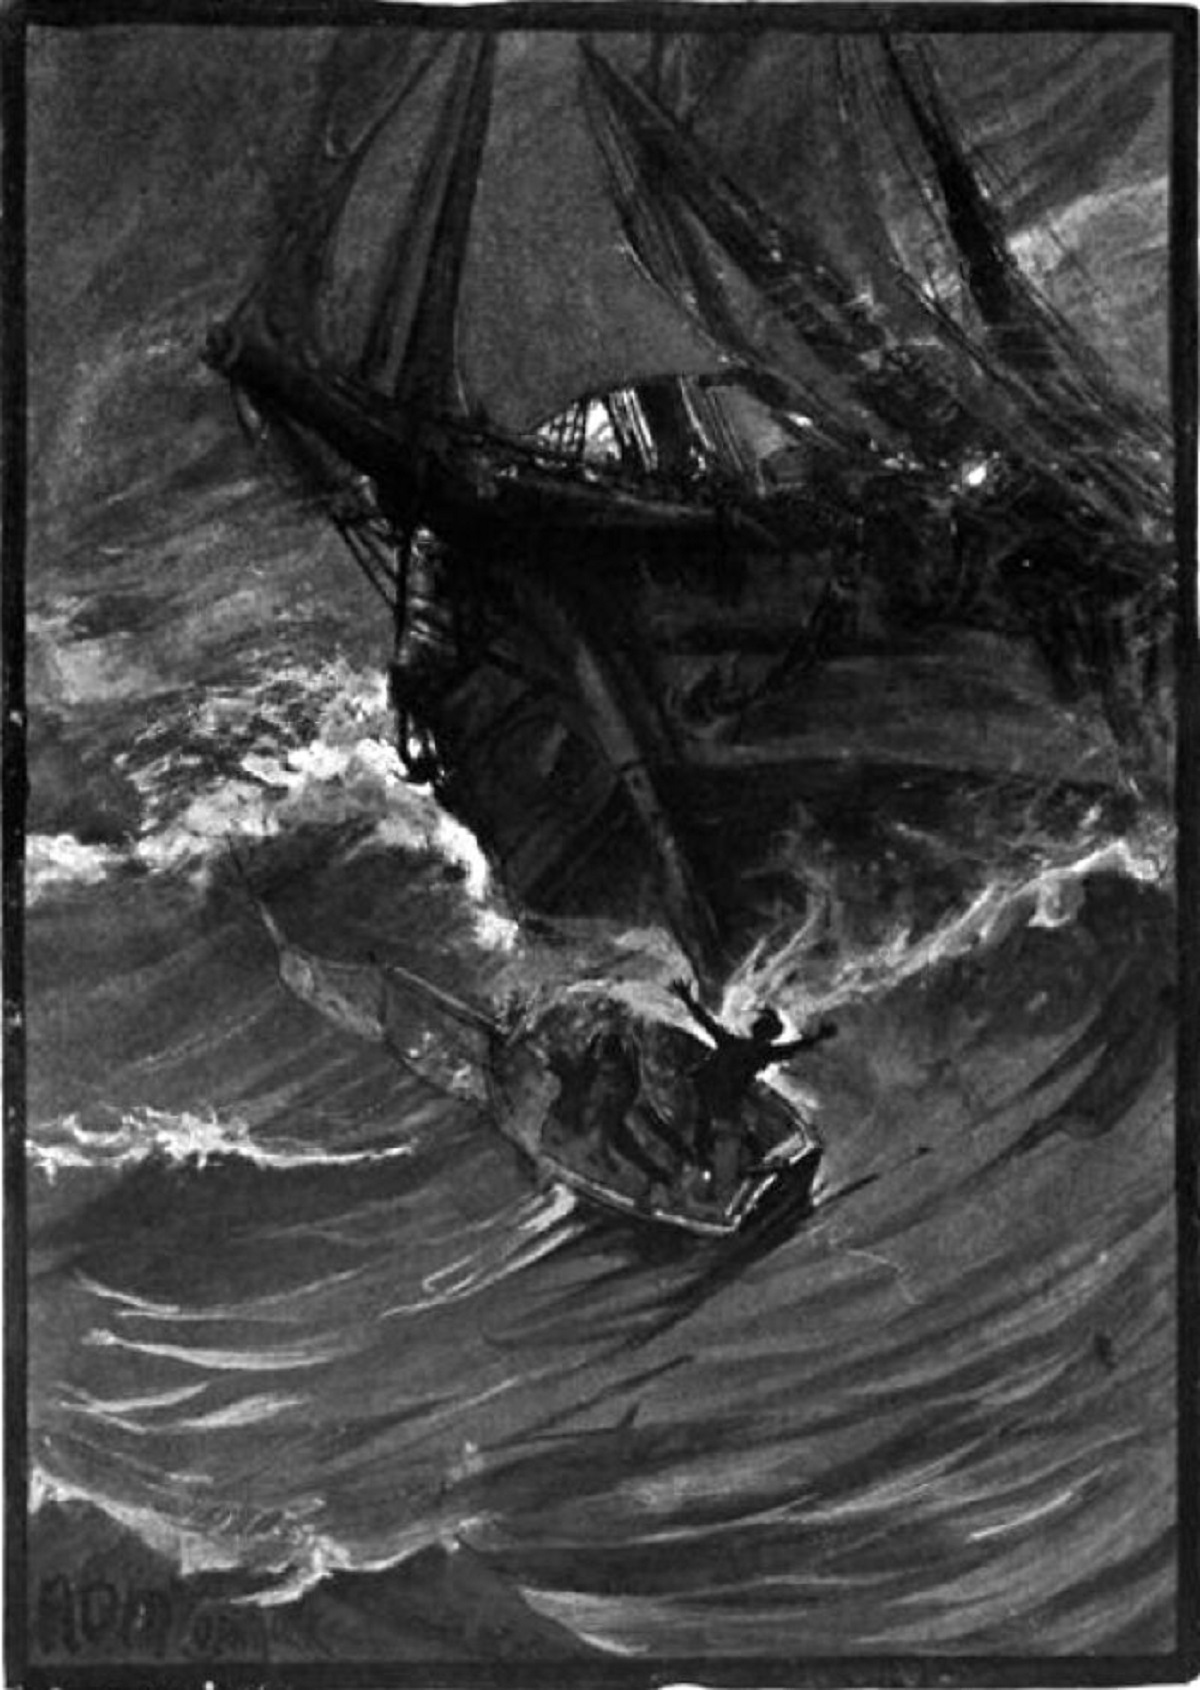 In 1884, a crew stranded on a boat on the high seas ate the cabin boy, Richard Parker, to survive. (R v Dudley and Stephens case)

In 1838, Edgar Allan Poe's first and only novel was published (The Narrative of Arthur Gordon Pym of Nantucket). In the novel, a group of whaling sailors are stranded on a boat. To prevent them from dying of hunger and thirst, one of the crew offers to draw lots. The crew agrees. The one who draws the short straw is also the one who offered it. But the irony is not there. The real irony is the name of this fictional character in the novel: Richard Parker.